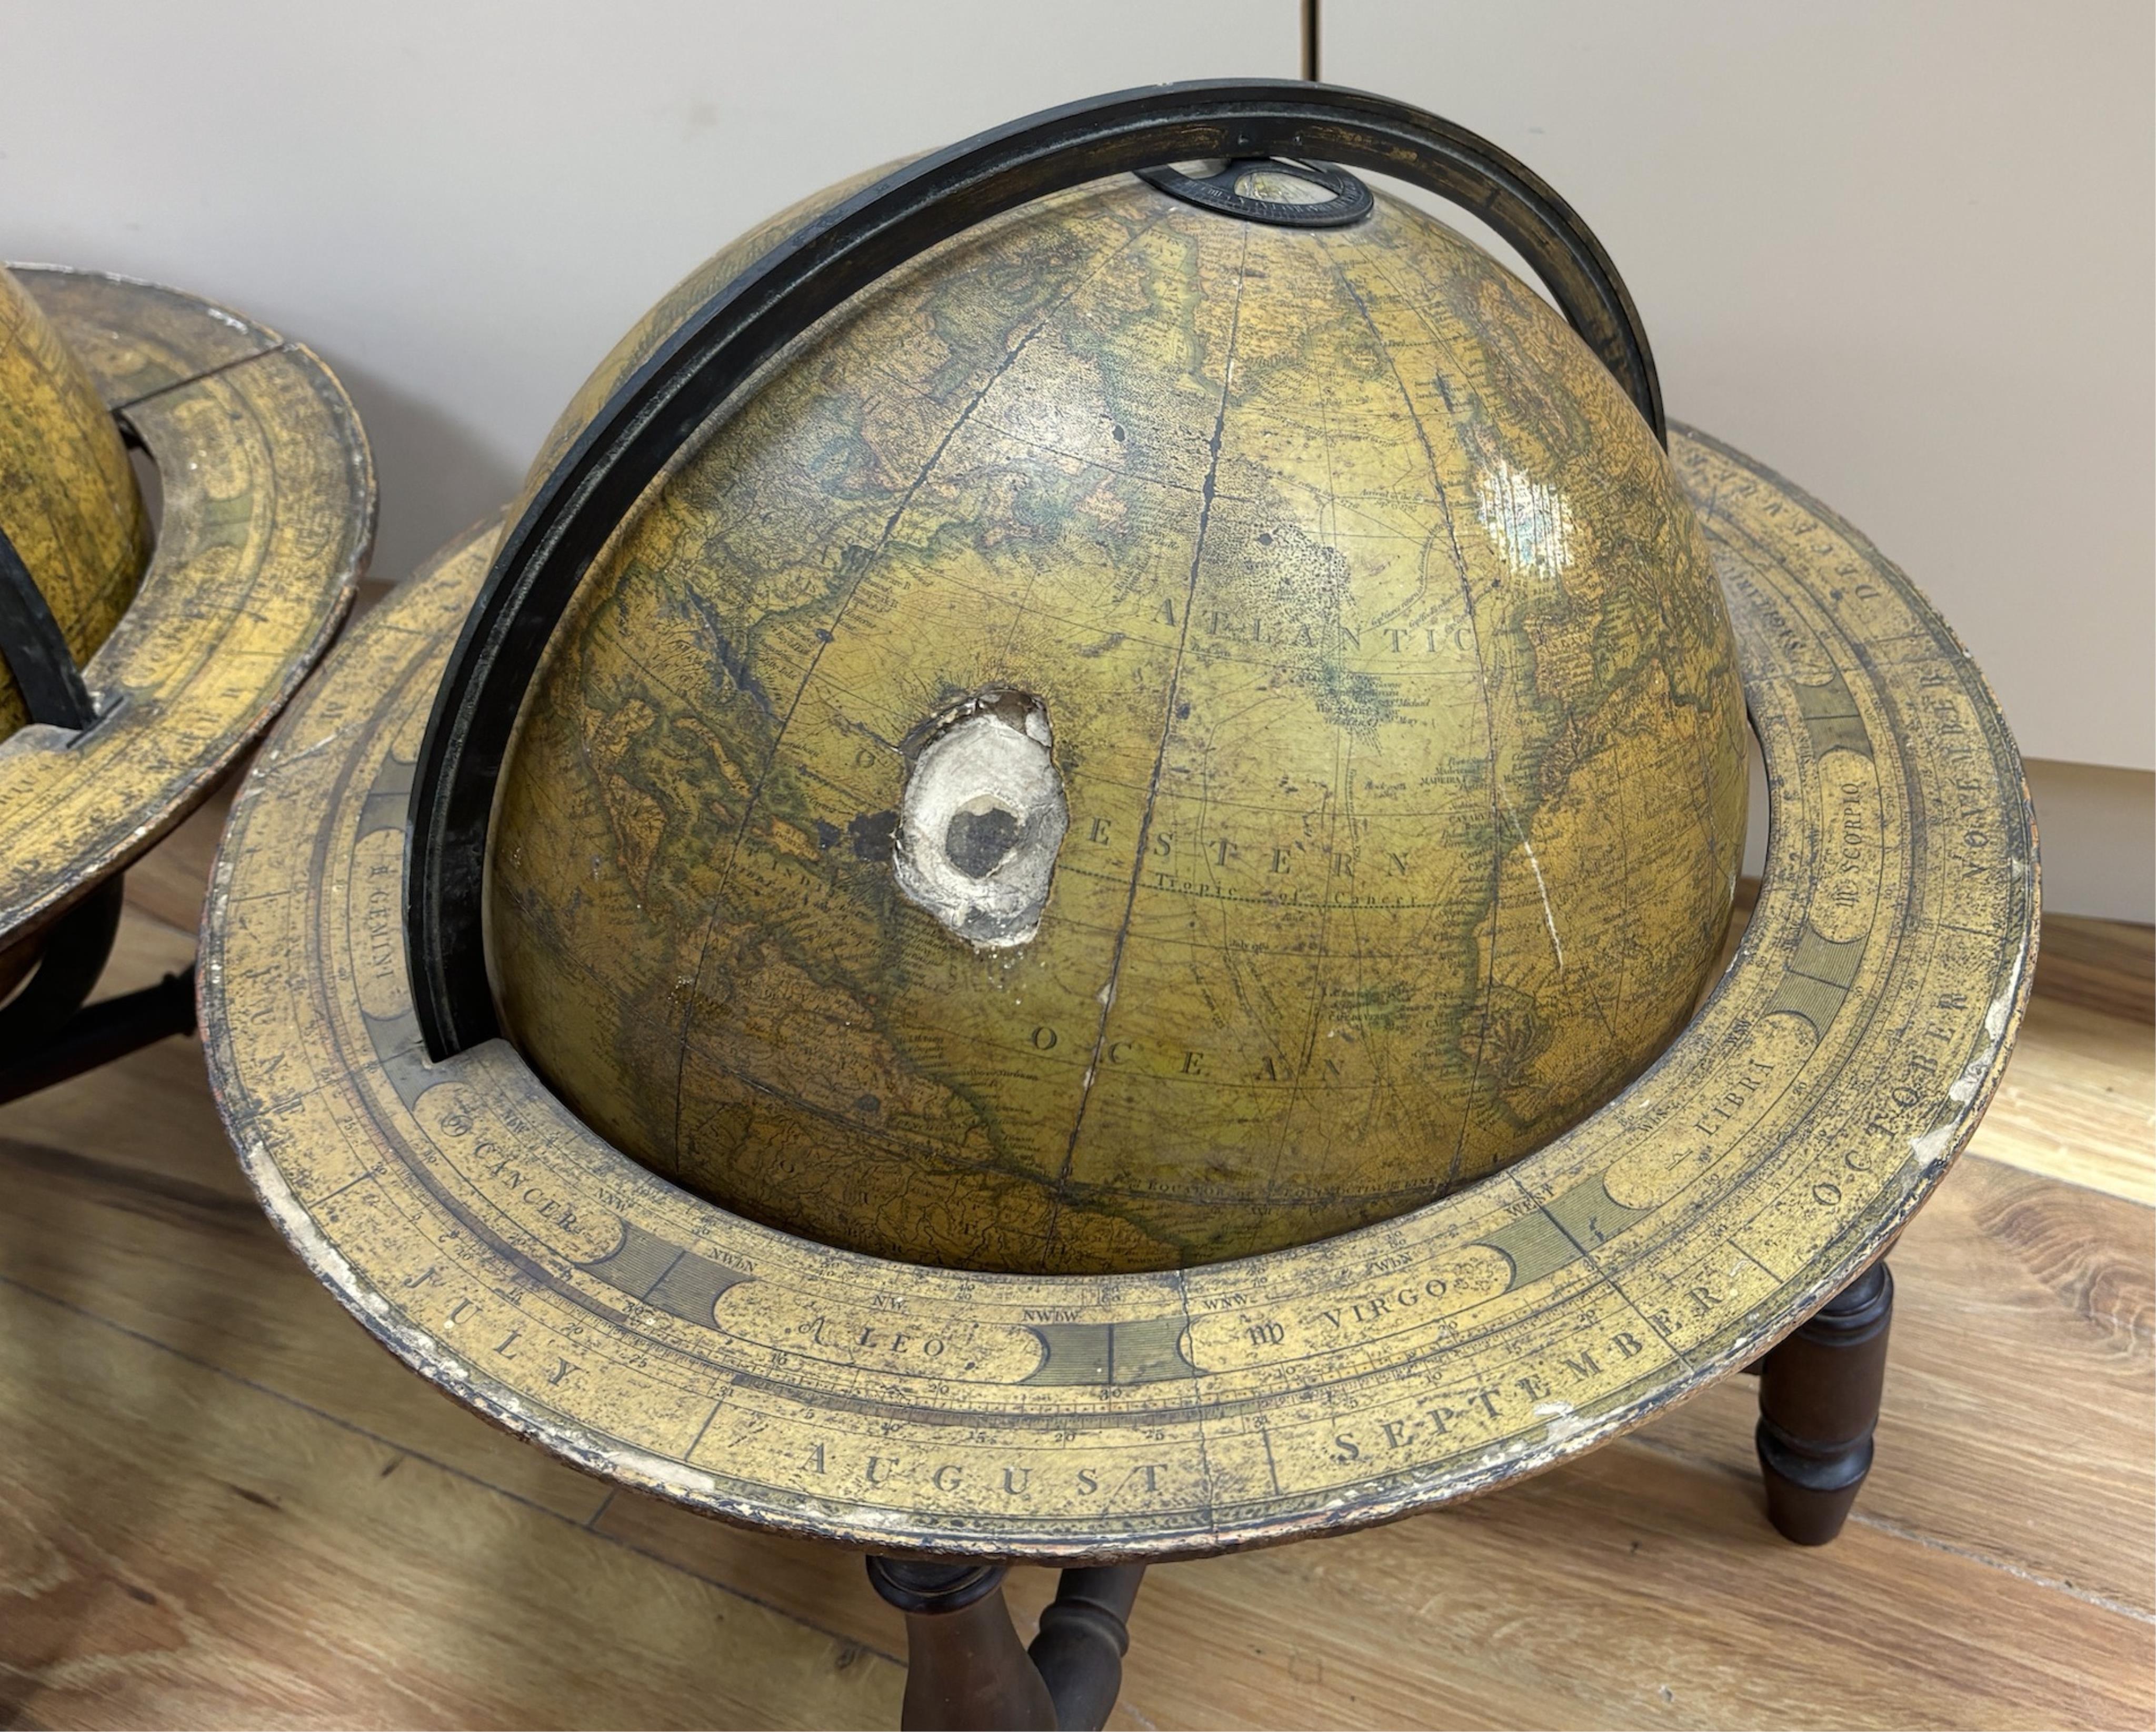 A pair of early to mid-19th century Cary celestial and terrestrial 12 inch globes with associated stands, each globe on a turned mahogany frame with applied paper zodiac and month ring at the equator